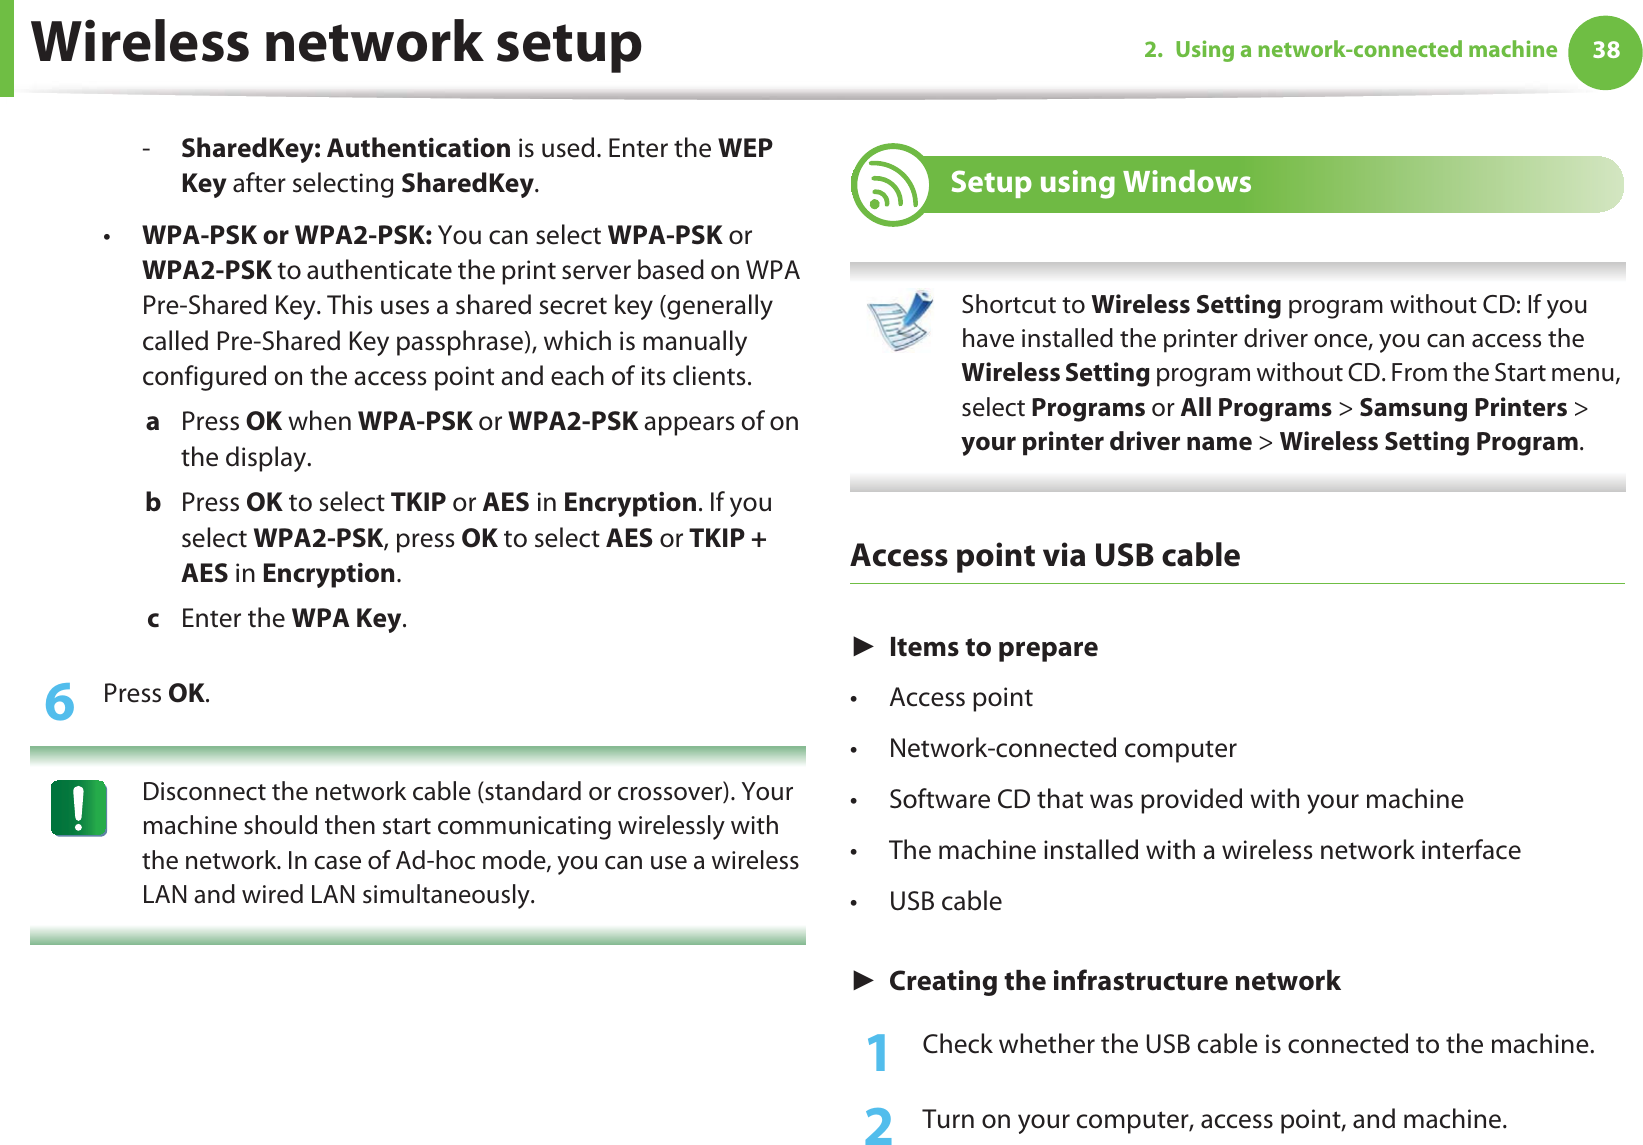 Wireless network setup 382. Using a network-connected machine-SharedKey: Authentication is used. Enter the WEP Key after selecting SharedKey.•WPA-PSK or WPA2-PSK: You can select WPA-PSK or WPA2-PSK to authenticate the print server based on WPA Pre-Shared Key. This uses a shared secret key (generally called Pre-Shared Key passphrase), which is manually configured on the access point and each of its clients.a  Press OK when WPA-PSK or WPA2-PSK appears of on the display.b  Press OK to select TKIP or AES in Encryption. If you select WPA2-PSK, press OK to select AES or TKIP + AES in Encryption.c  Enter the WPA Key.6  Press OK. Disconnect the network cable (standard or crossover). Your machine should then start communicating wirelessly with the network. In case of Ad-hoc mode, you can use a wireless LAN and wired LAN simultaneously. 17 Setup using Windows Shortcut to Wireless Setting program without CD: If you have installed the printer driver once, you can access the Wireless Setting program without CD. From the Start menu, select Programs or All Programs &gt; Samsung Printers &gt; your printer driver name &gt; Wireless Setting Program. Access point via USB cableŹItems to prepare•Access point• Network-connected computer• Software CD that was provided with your machine• The machine installed with a wireless network interface•USB cableŹCreating the infrastructure network1Check whether the USB cable is connected to the machine.2  Turn on your computer, access point, and machine.